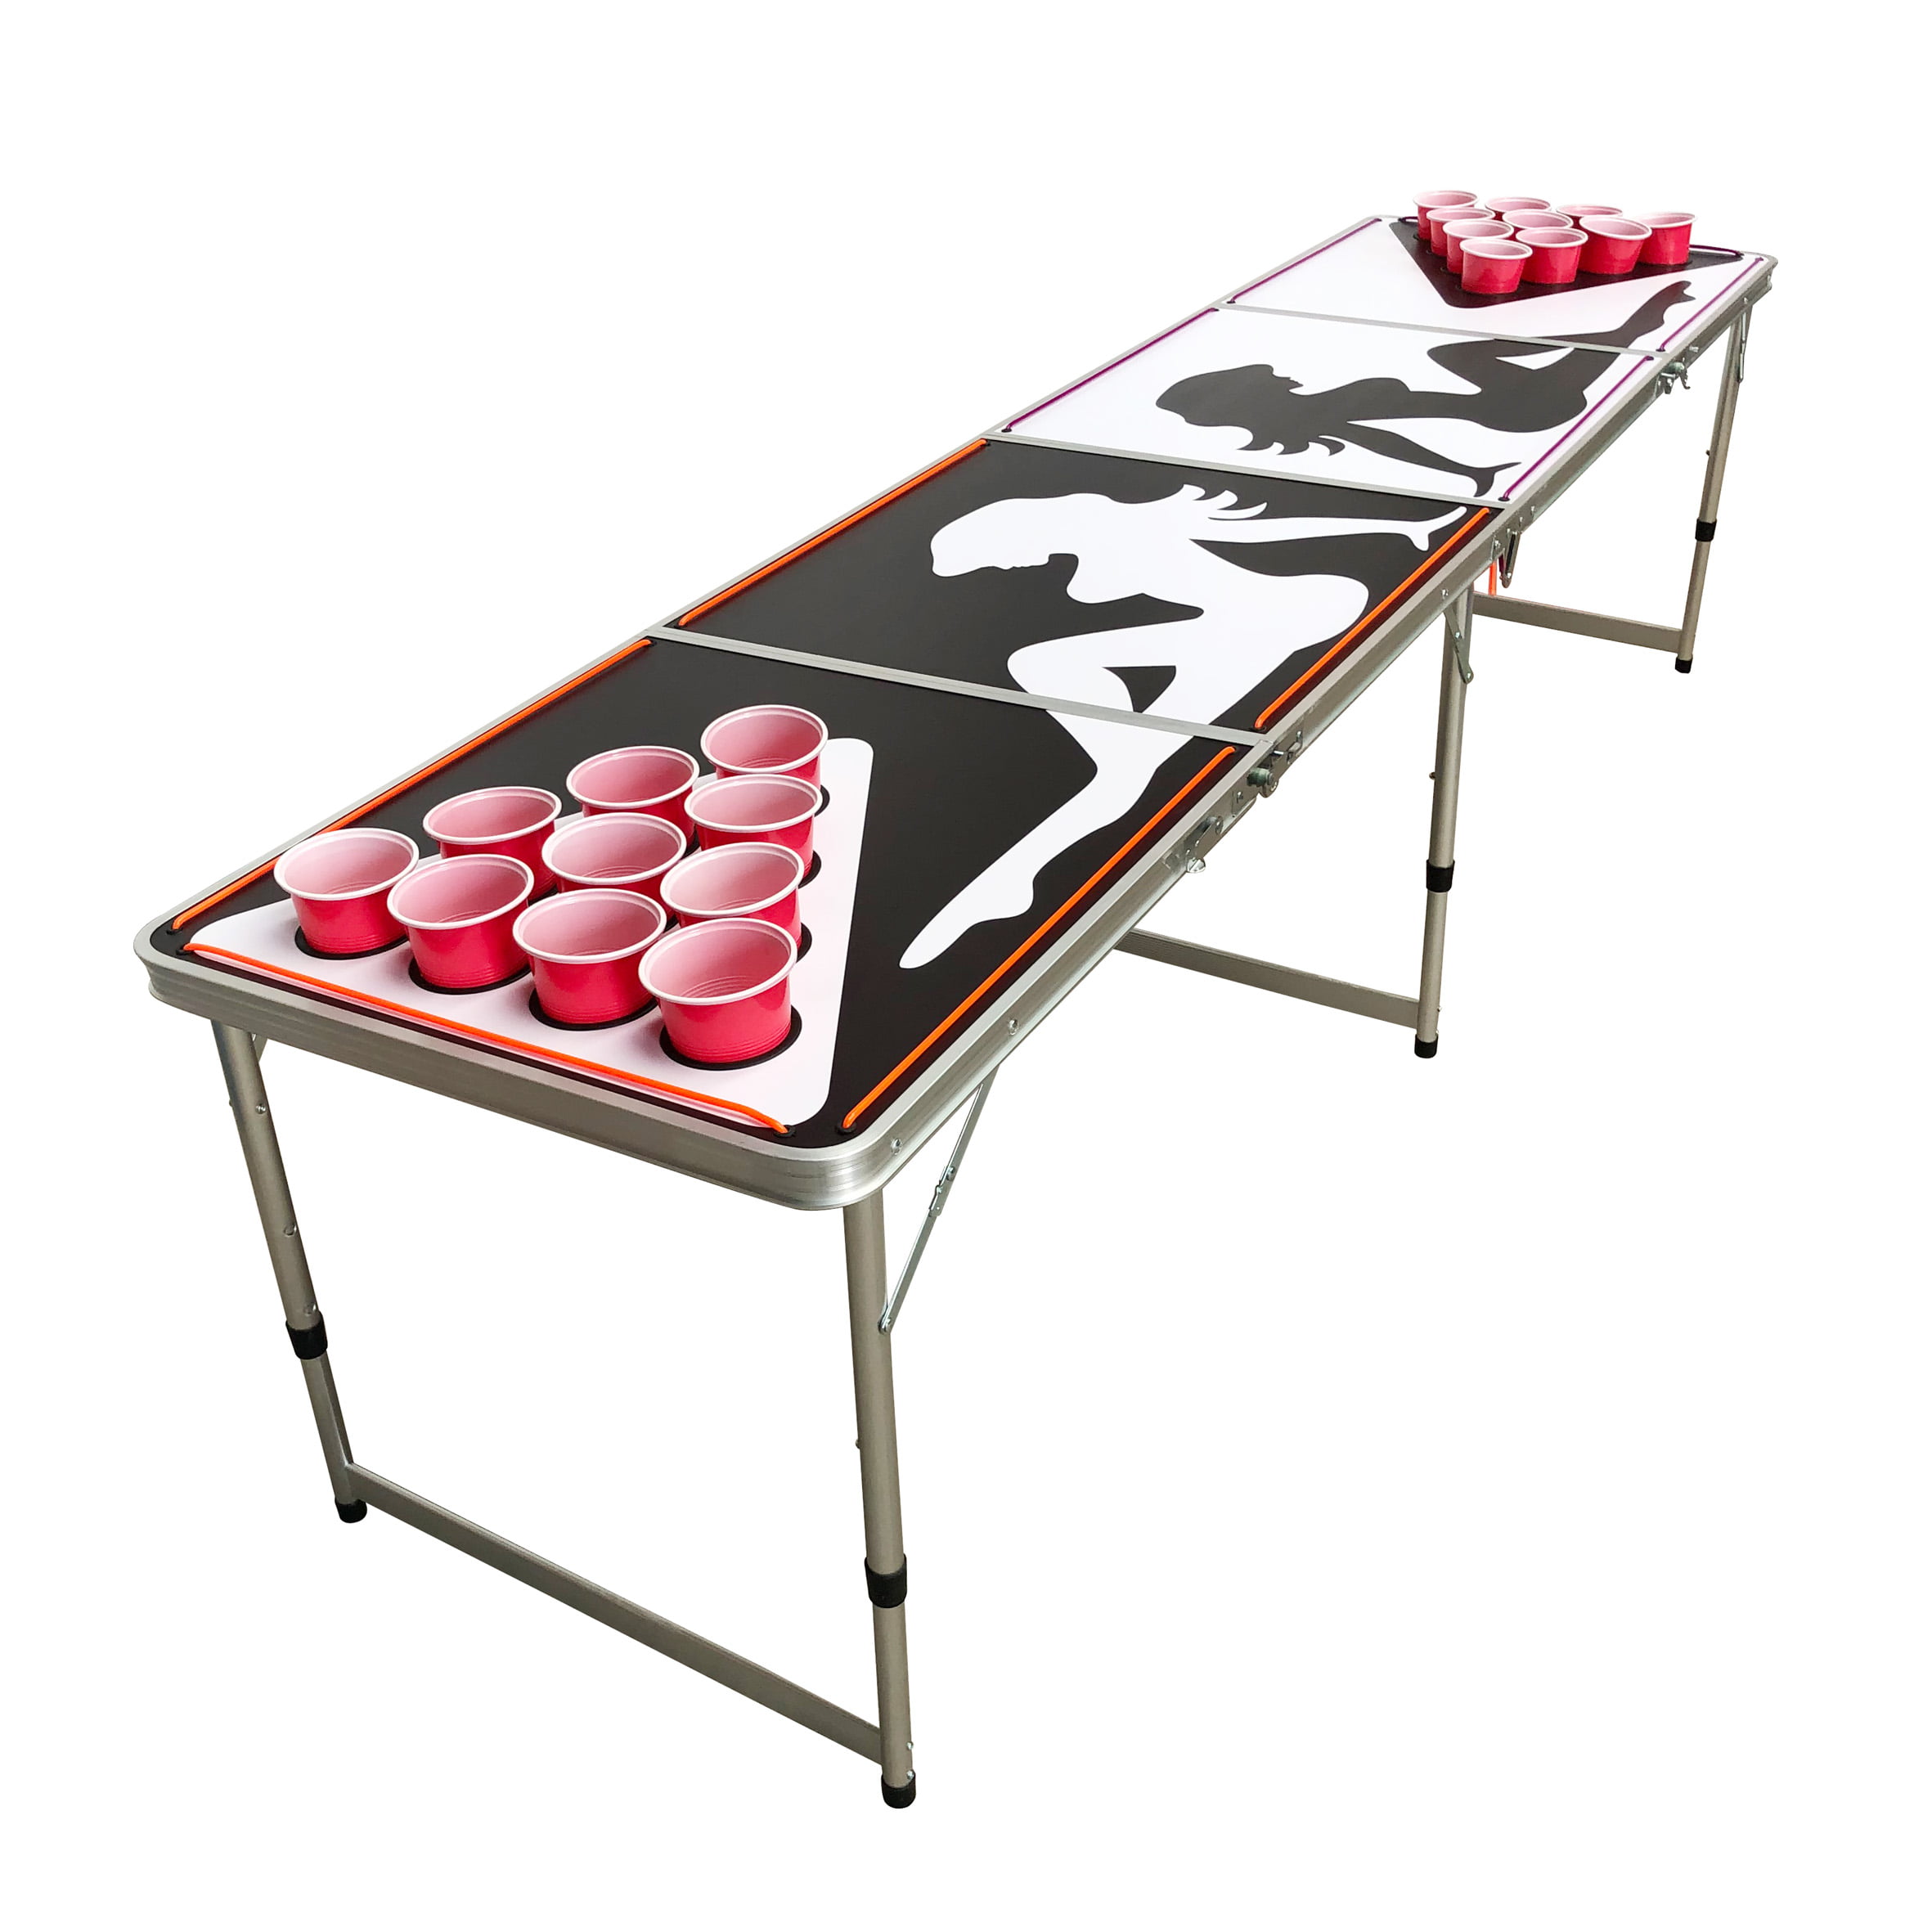 BEER PONG TABLE 8' FOLDING TAILGATE DRINKING GAME CUP HOLES LED LIGHTS #8 